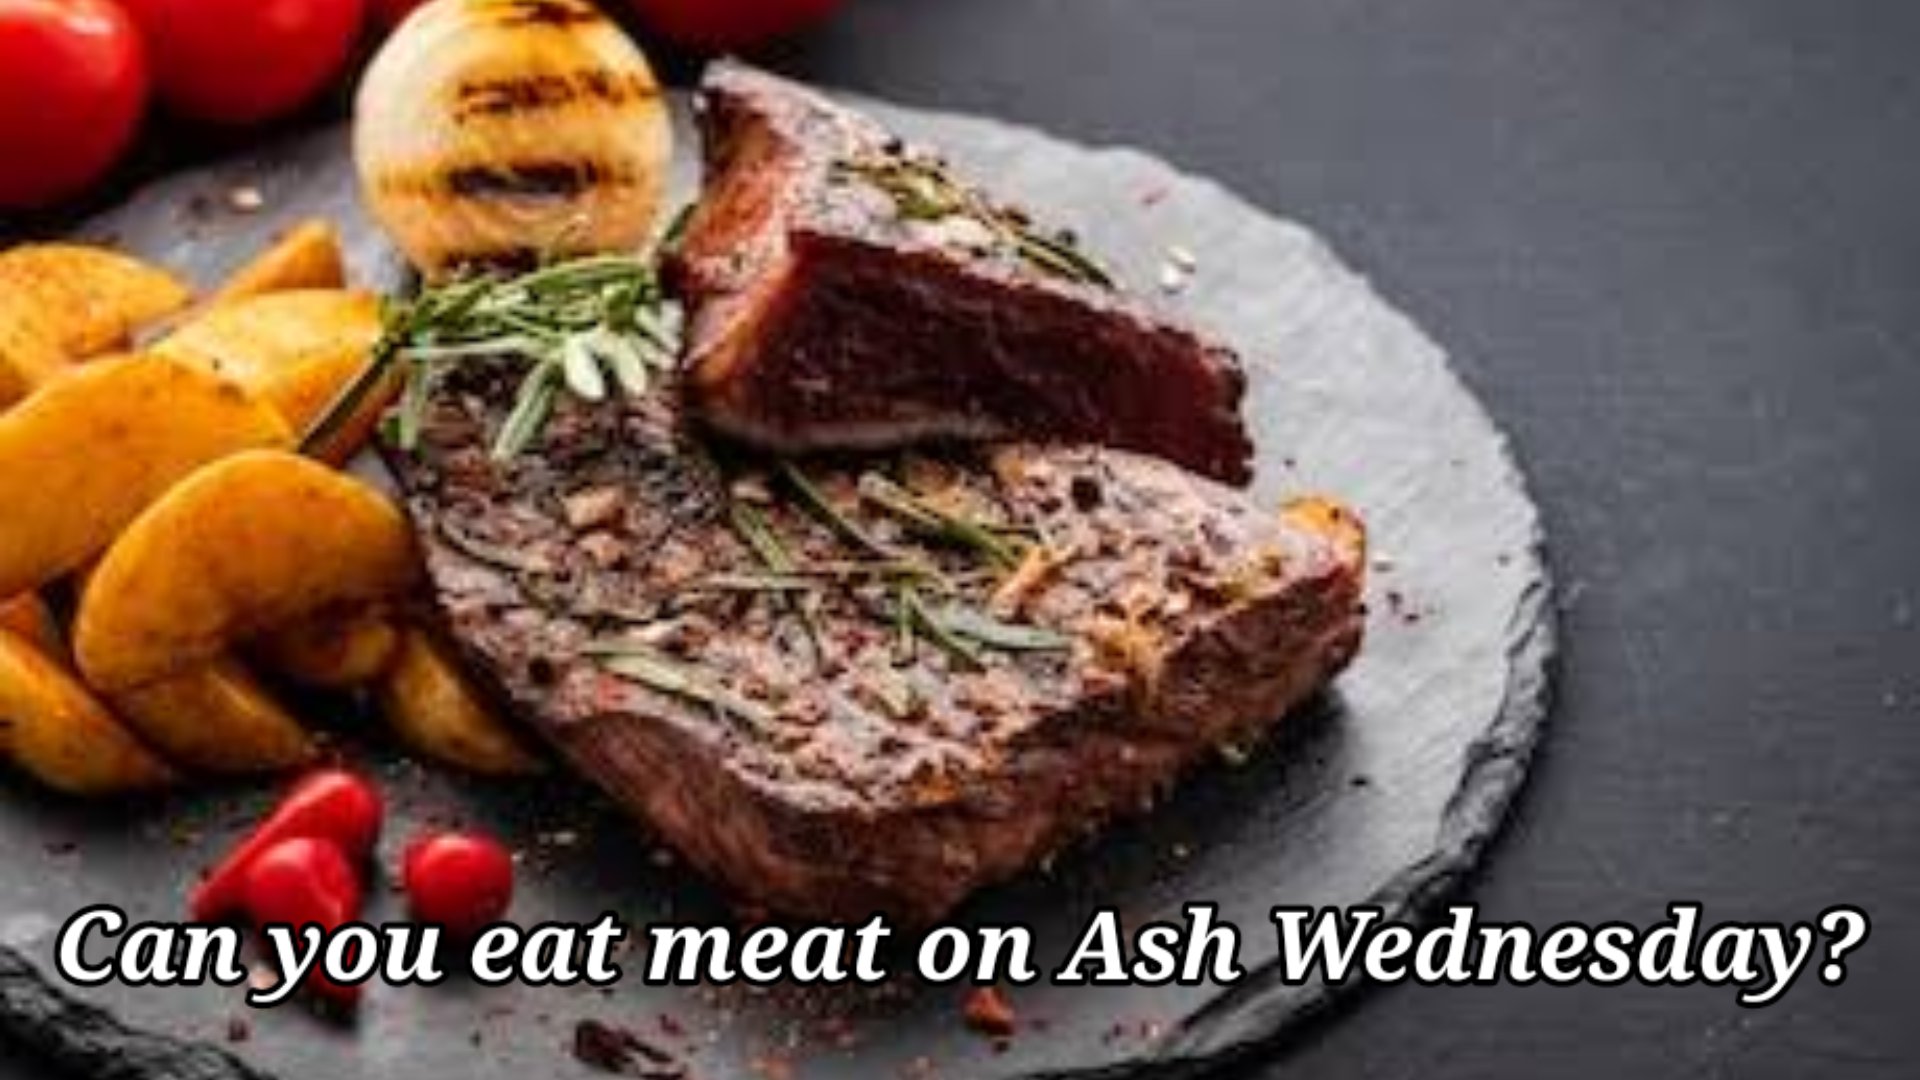 Can you eat meat on Ash Wednesday?